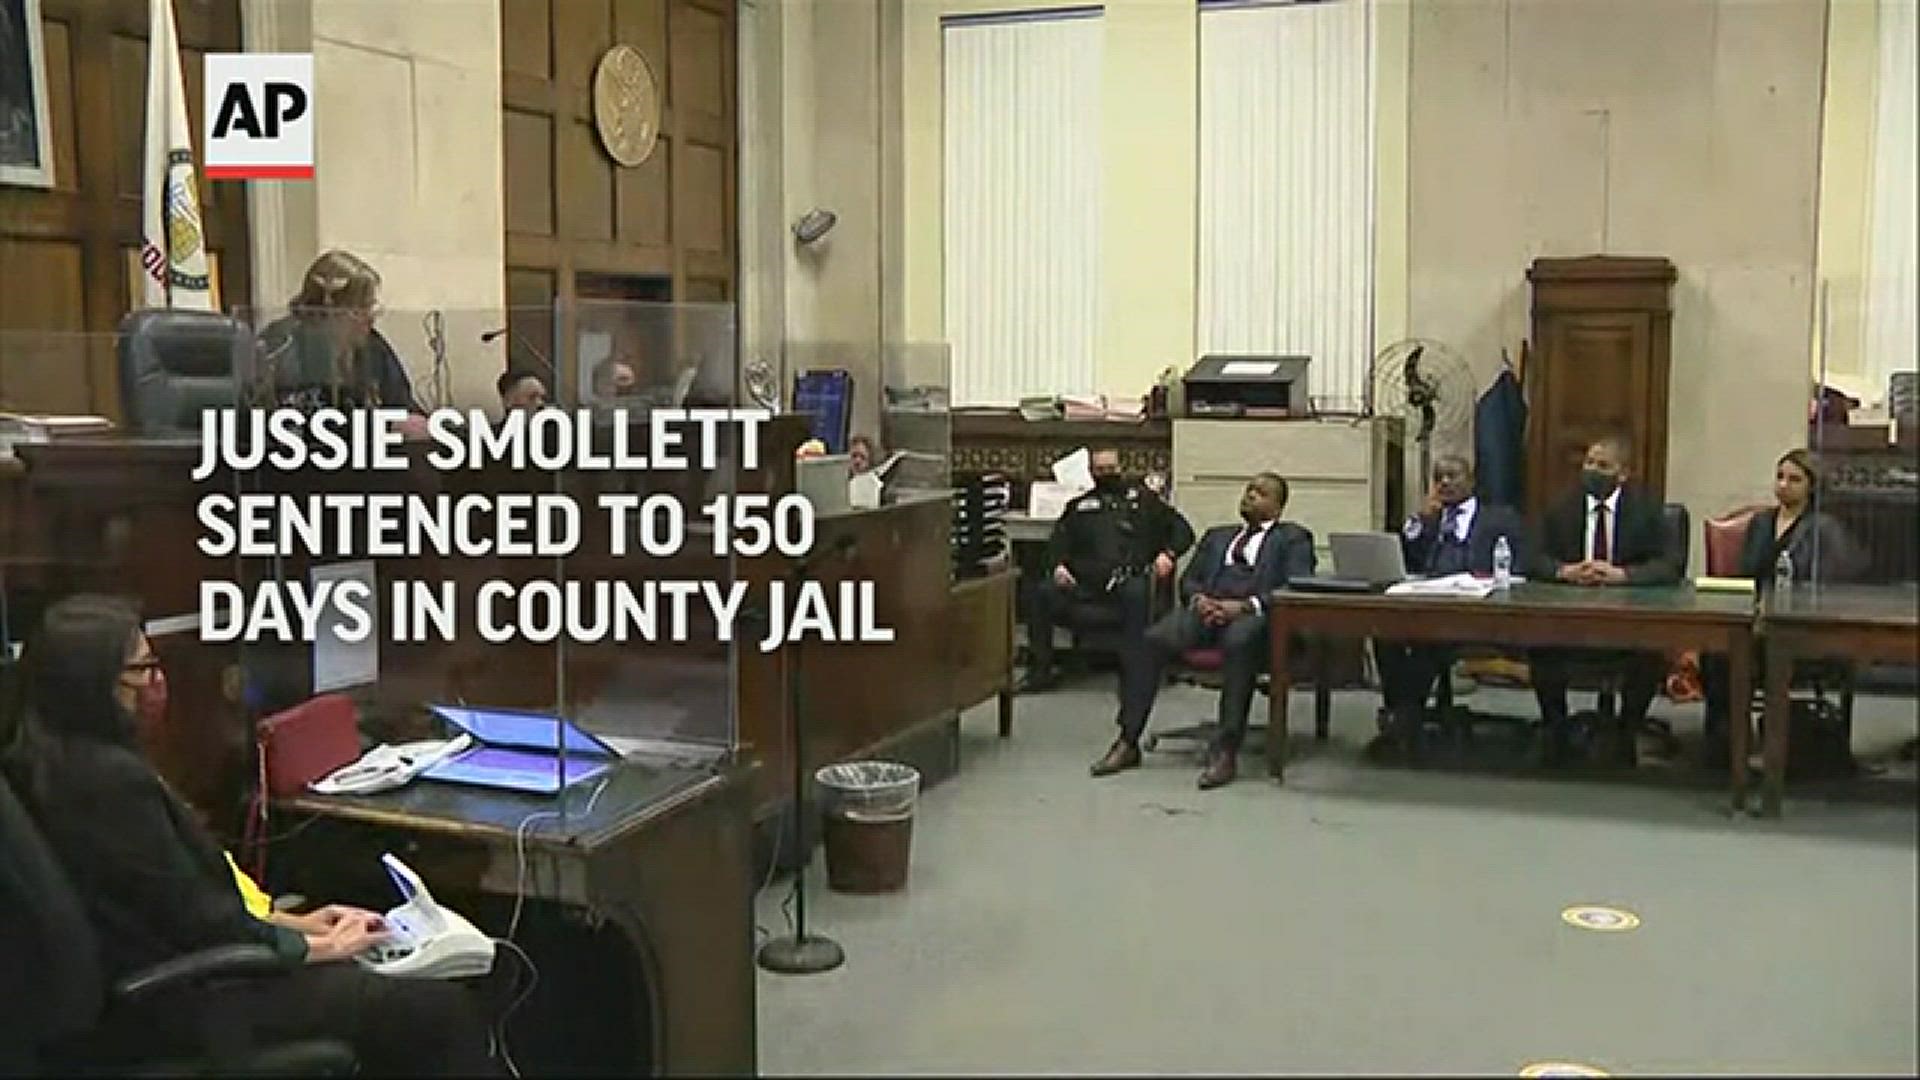 Jussie Smollett was sentenced to 150 days in jail for lying to police about a racist and homophobic attack that the former “Empire” actor orchestrated himself.